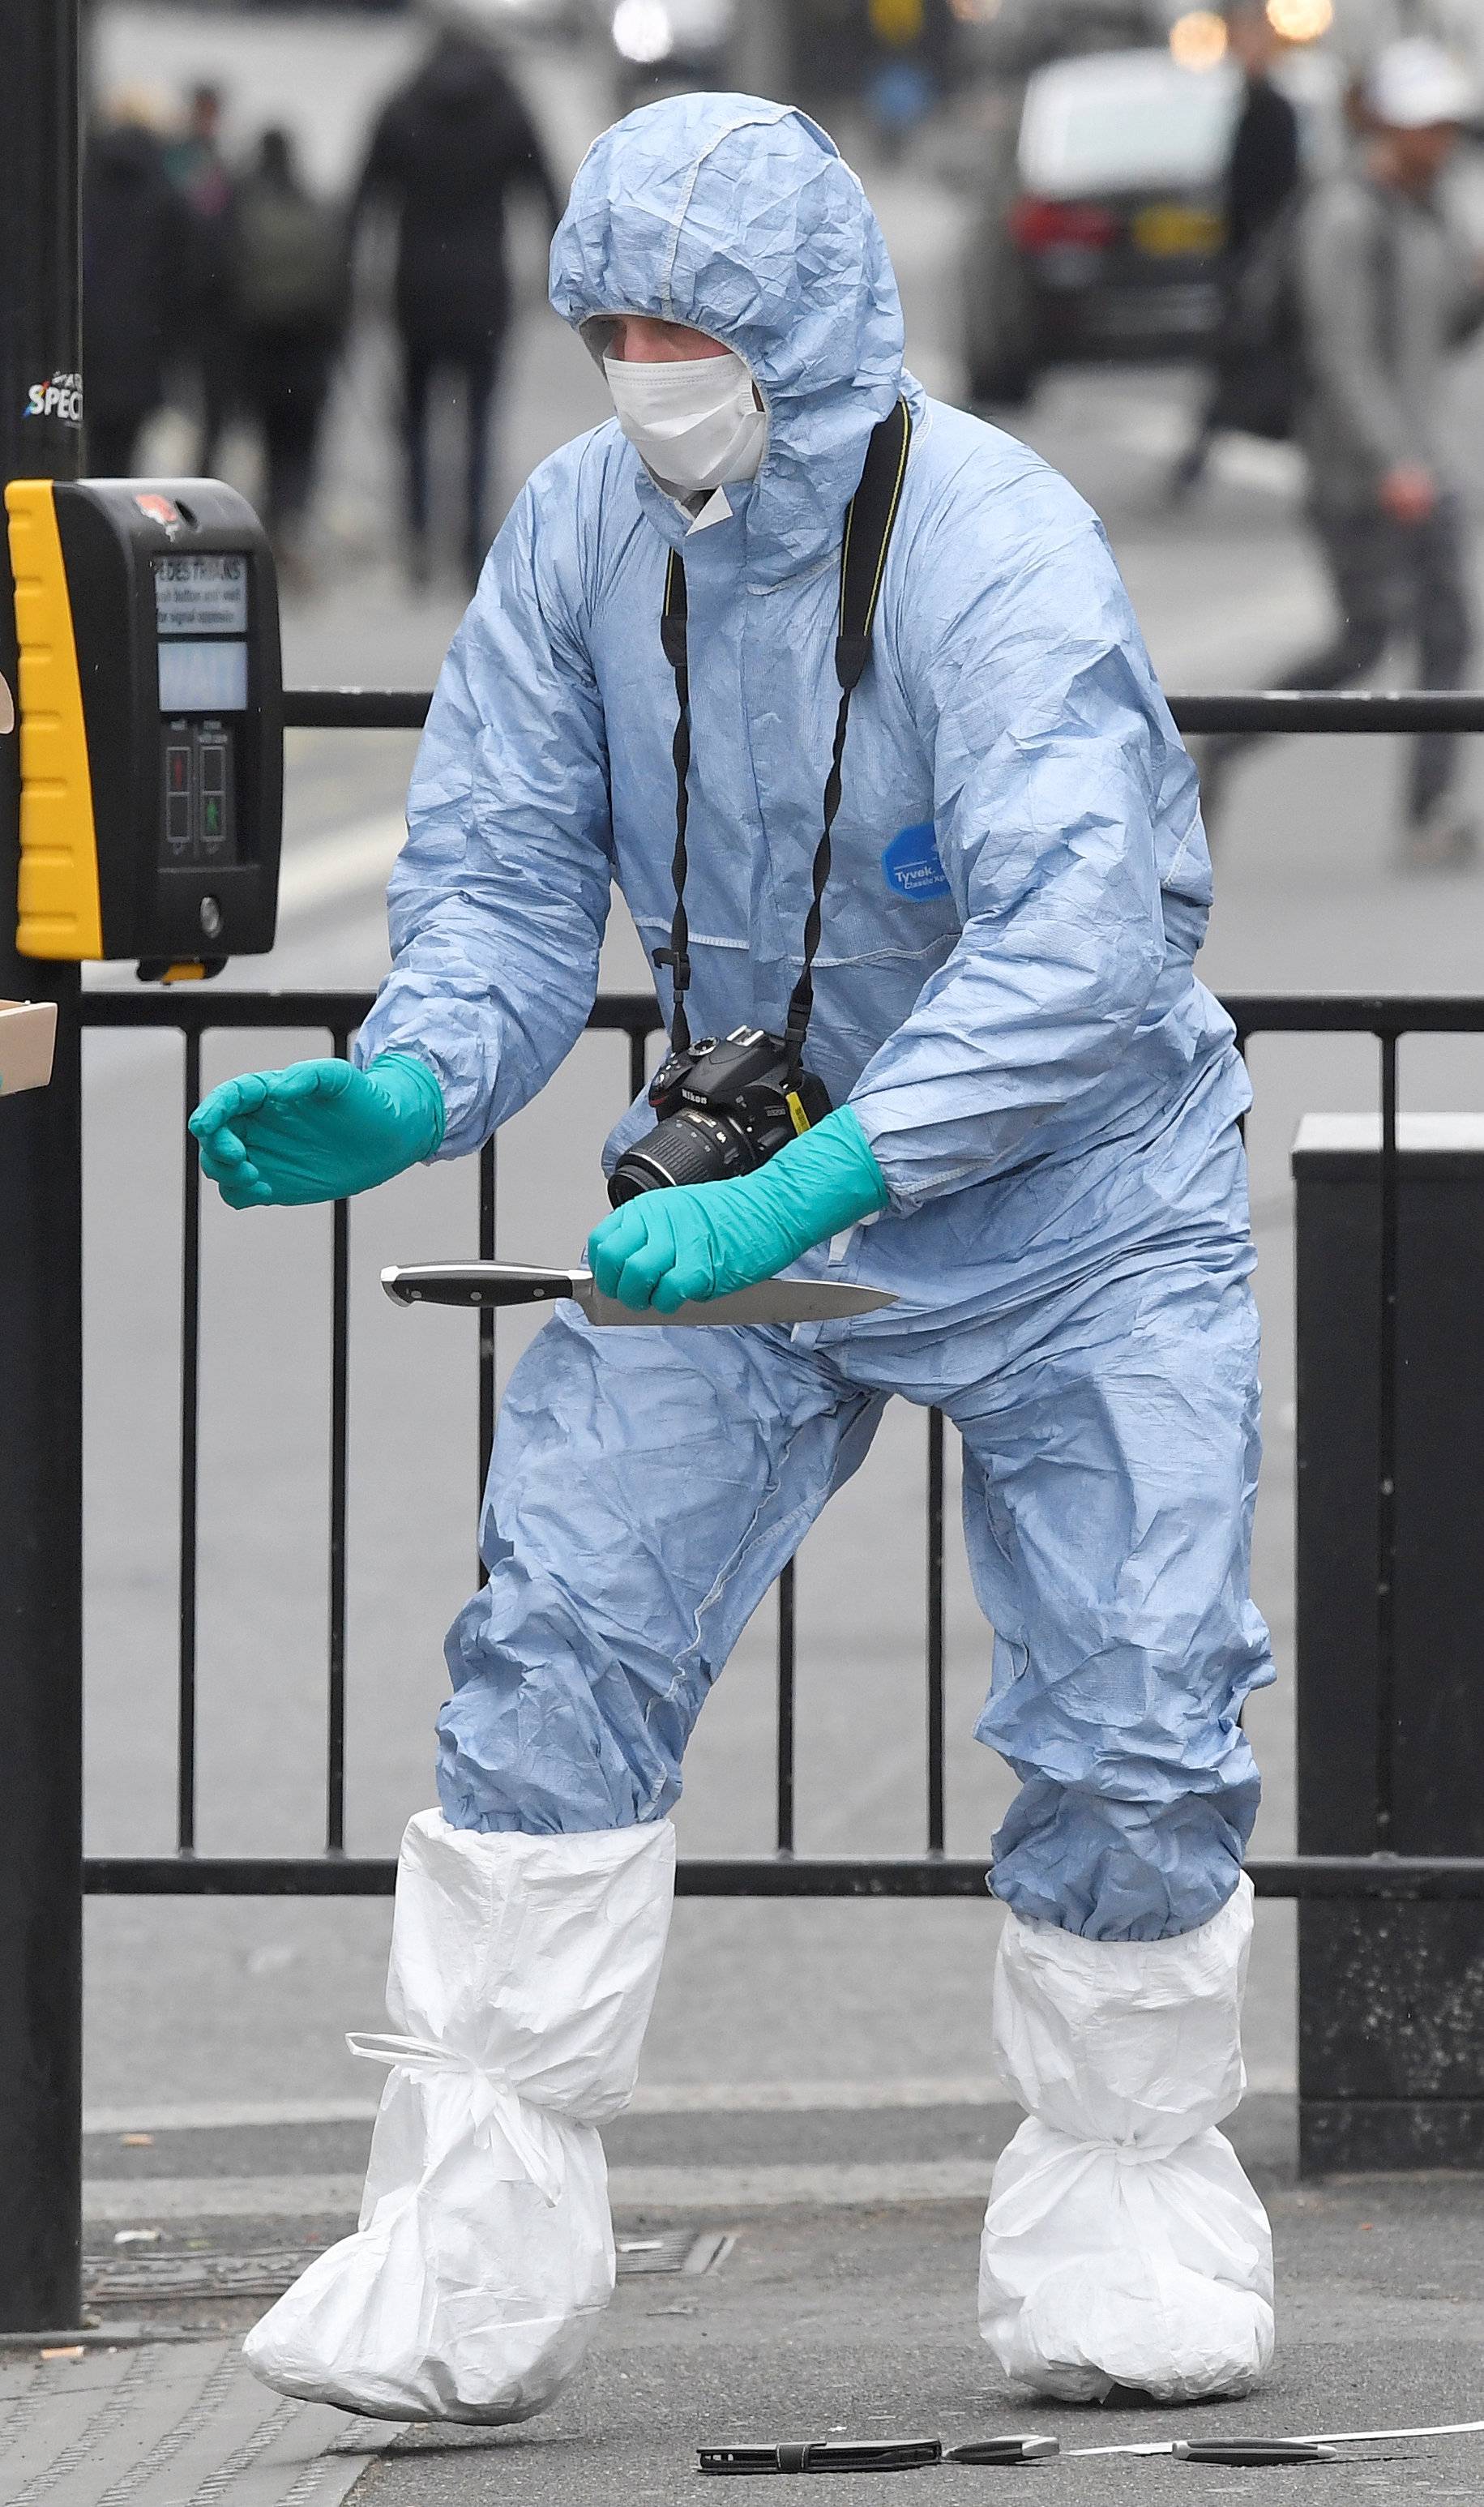 A forensic investigator recovers a knife after man was arrested on Whitehall in Westminster, central London